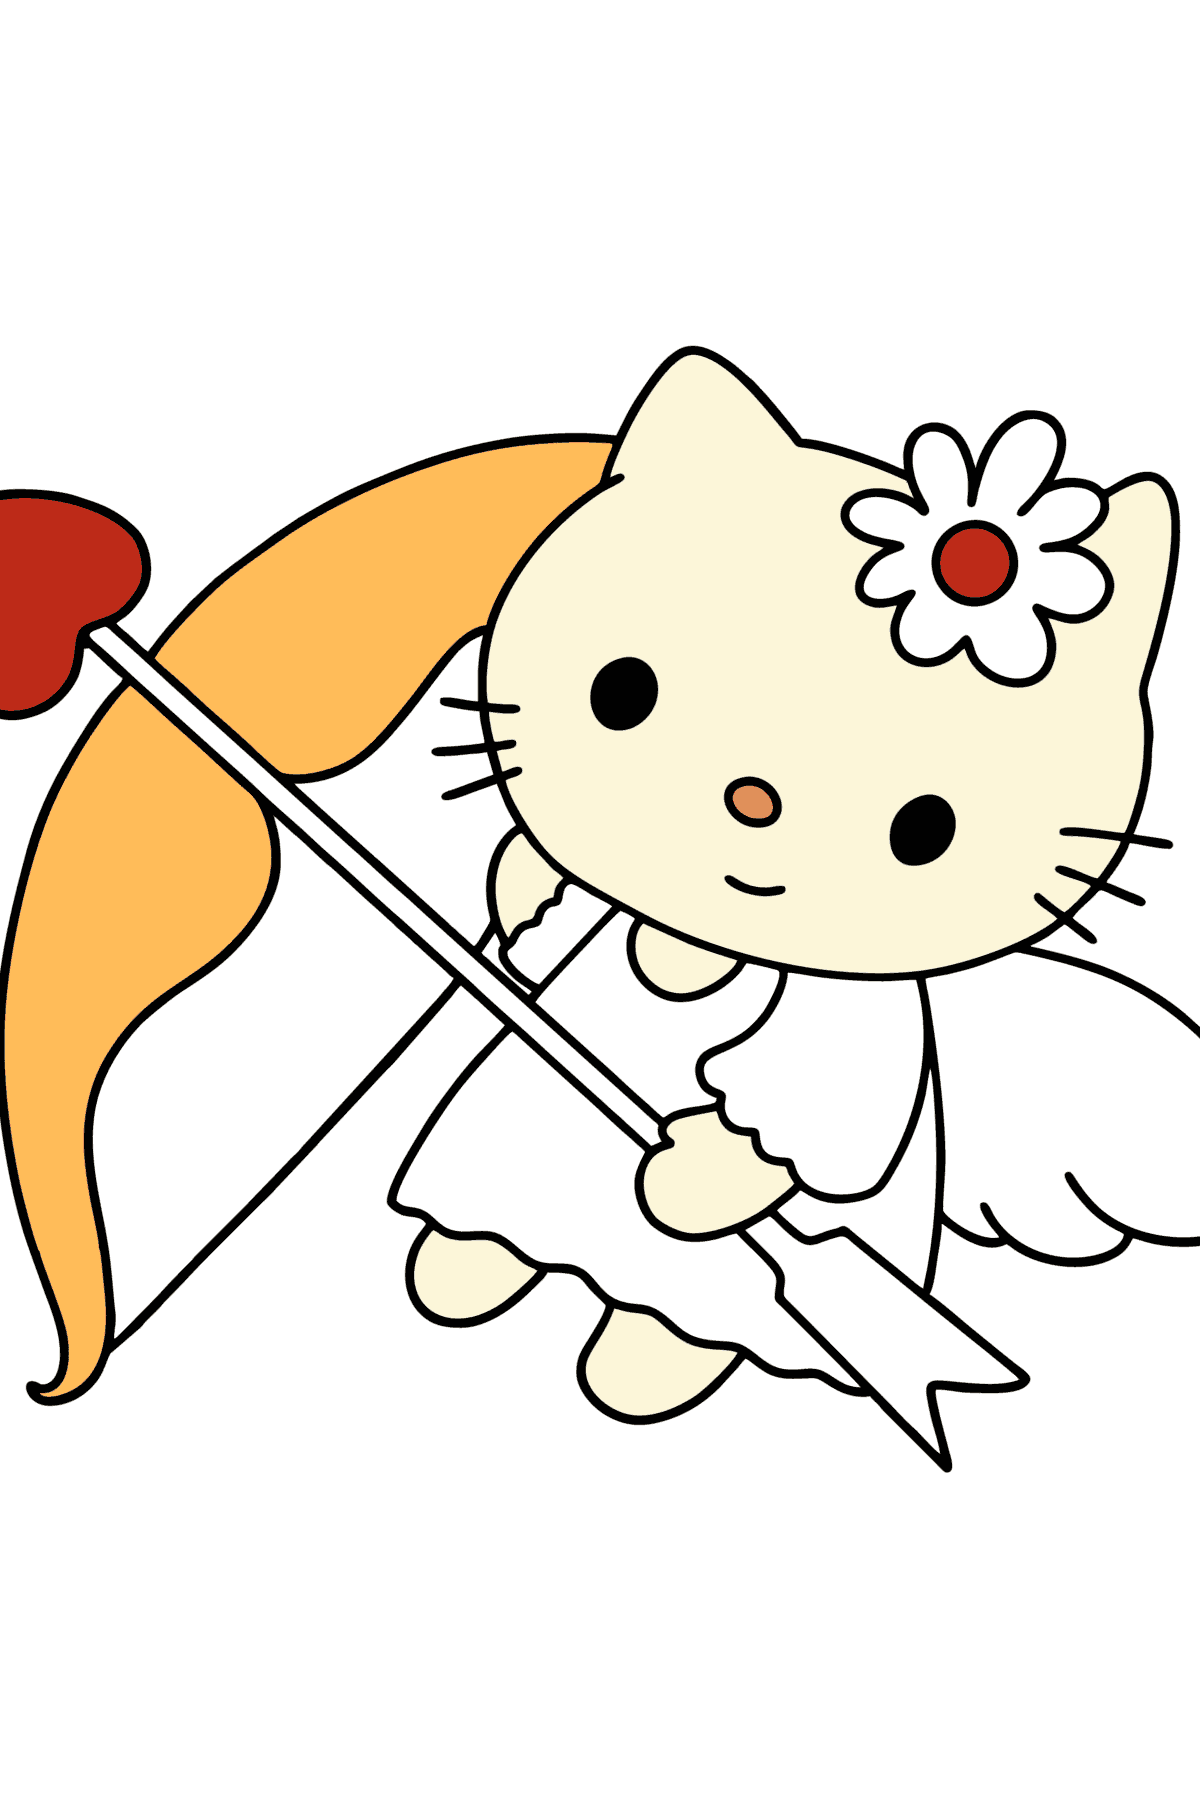 Hello Kitty on valentine's day coloring page - Coloring Pages for Kids